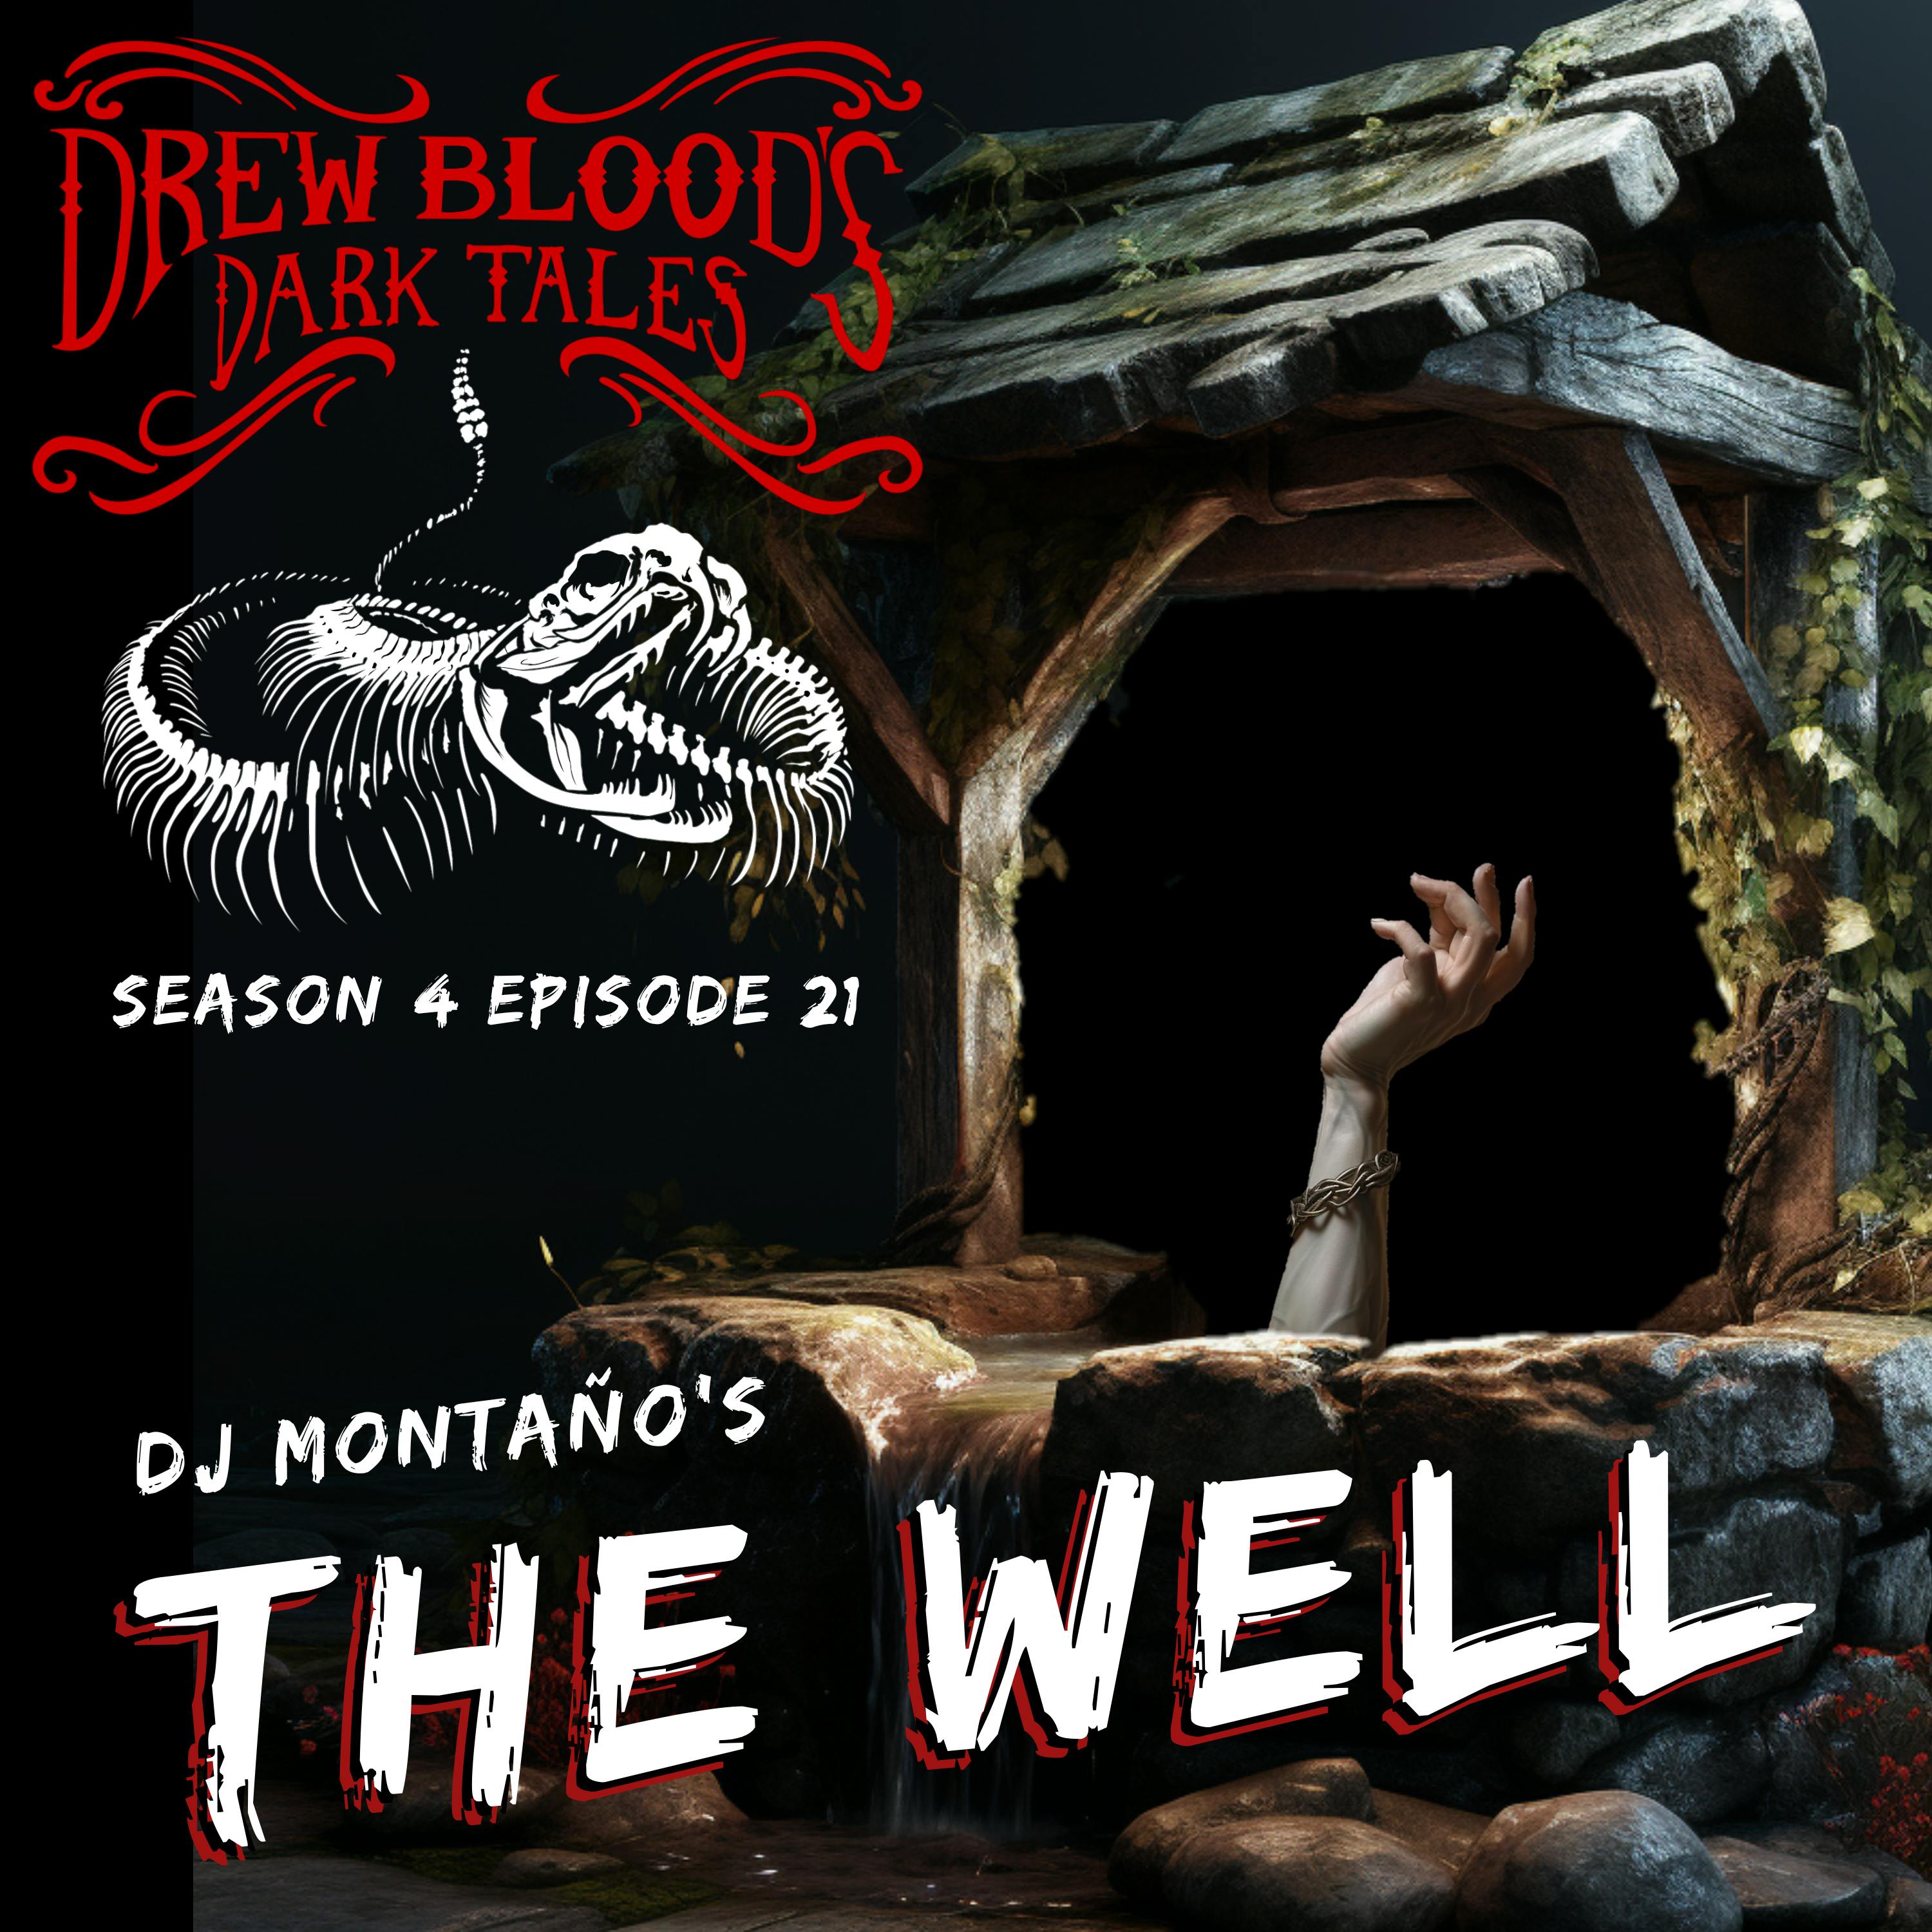 S4E21 - "The Well" - Drew Blood